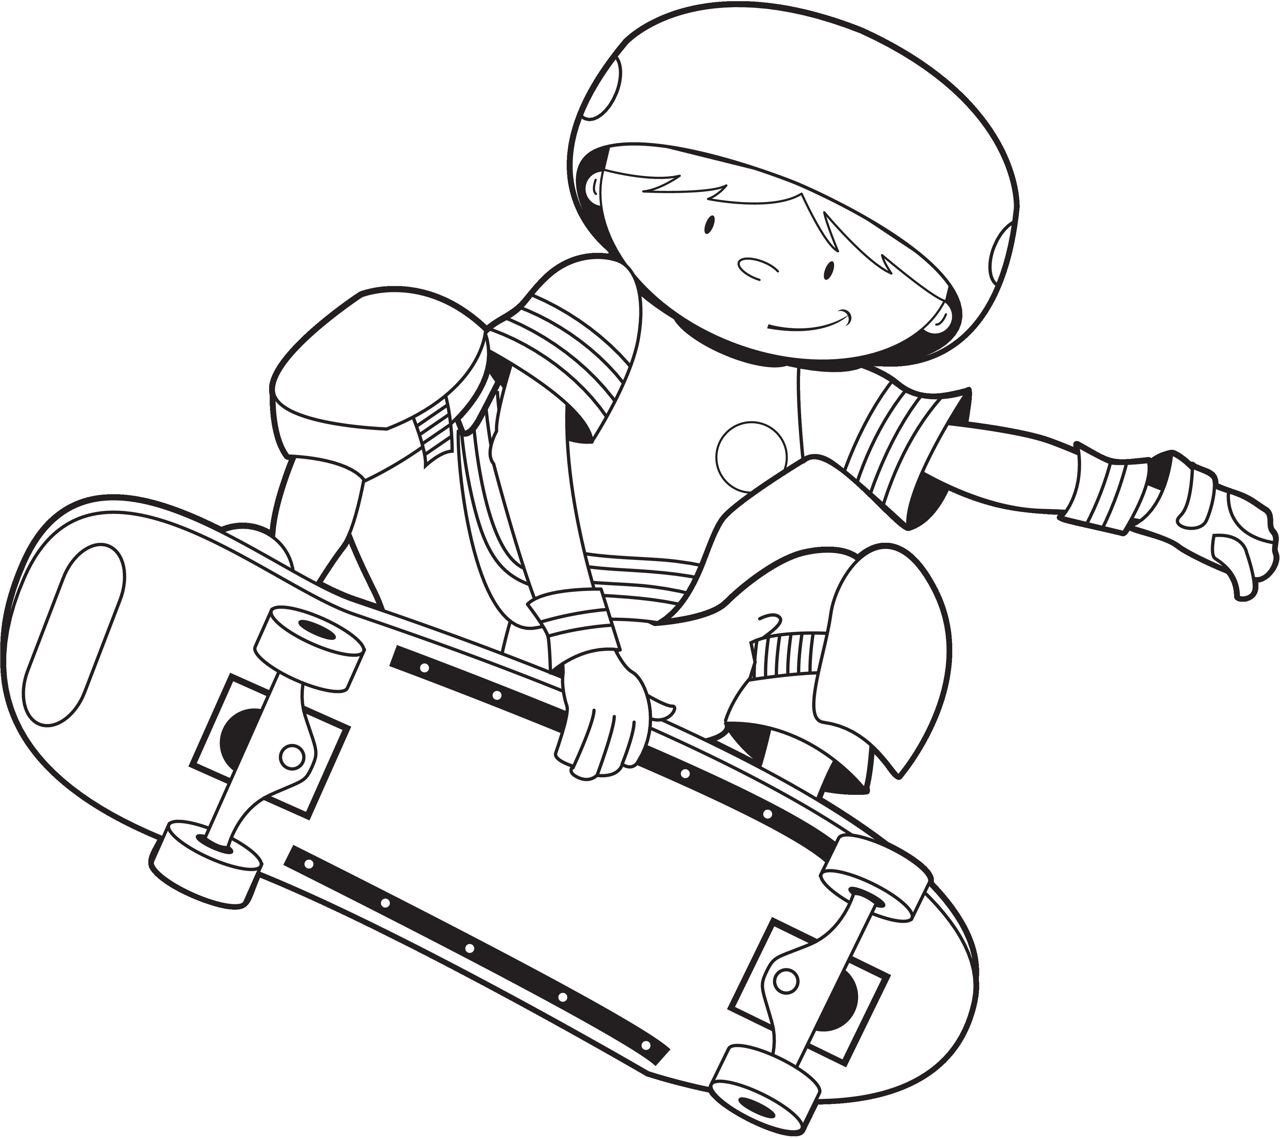 Cool Images Coloring Pages For Boys
 10 Cool Coloring Pages for Boys to Print Out For Free